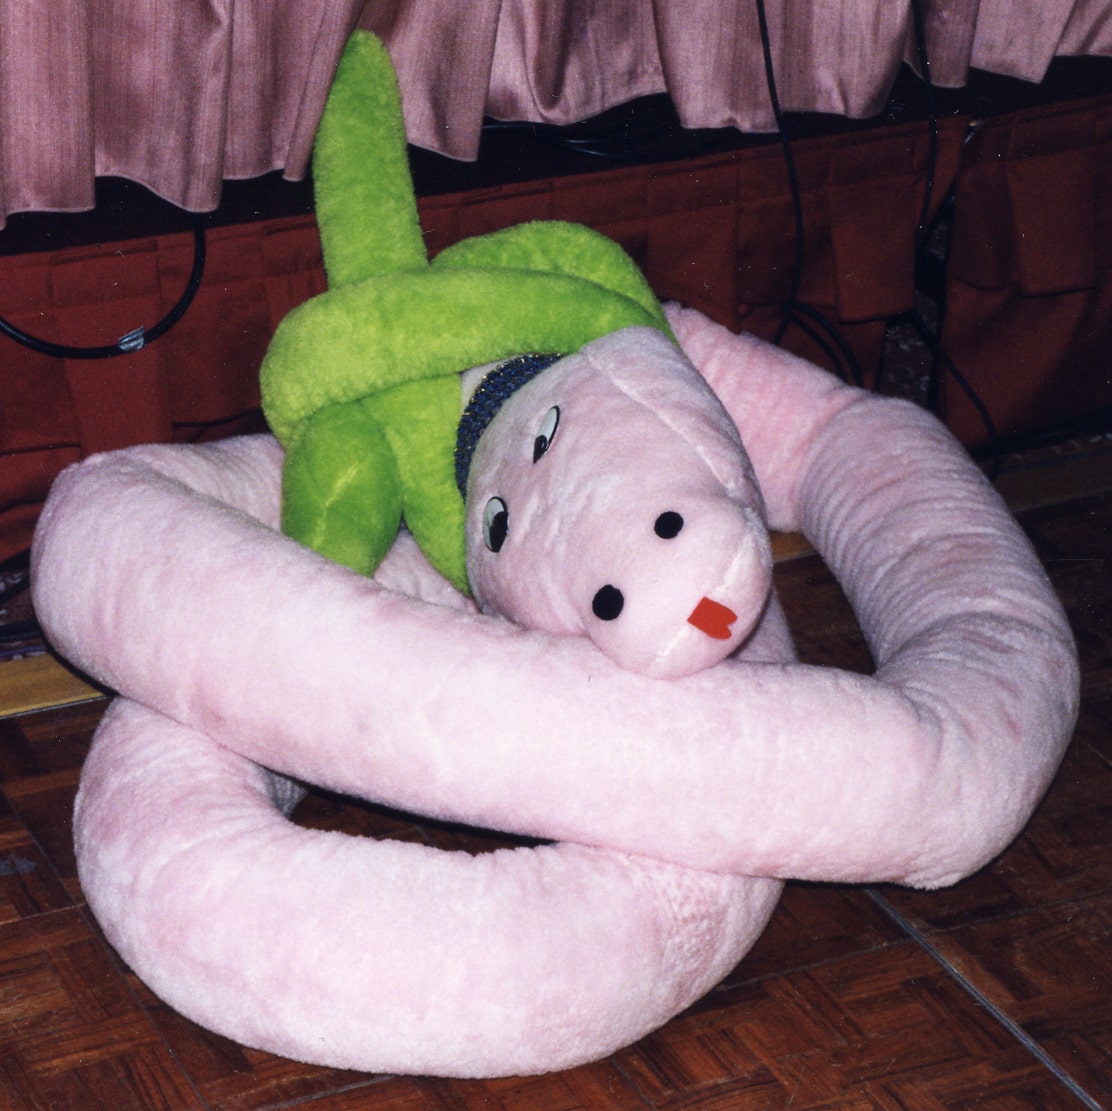 A stuffed pinked snakes with a green bow on its head.